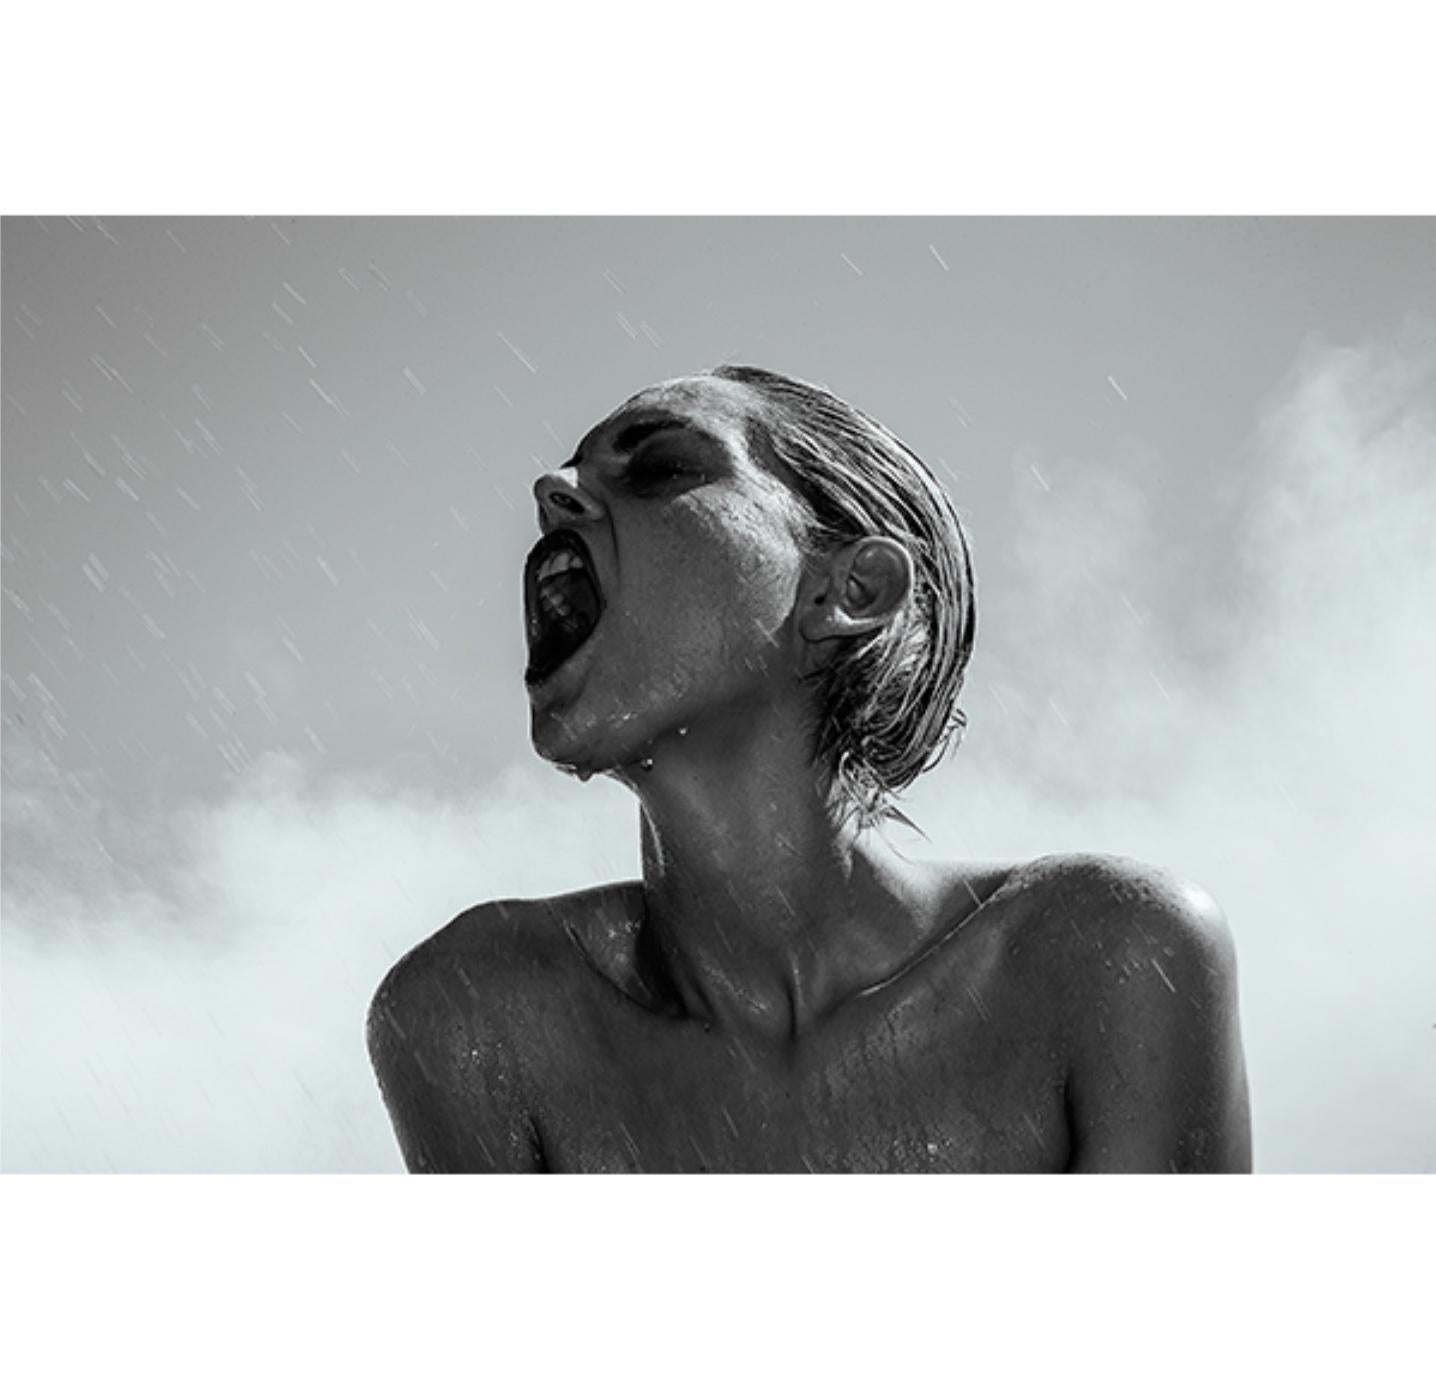 Tyler Shields Black and White Photograph - Pouring Rain (48" x 72")